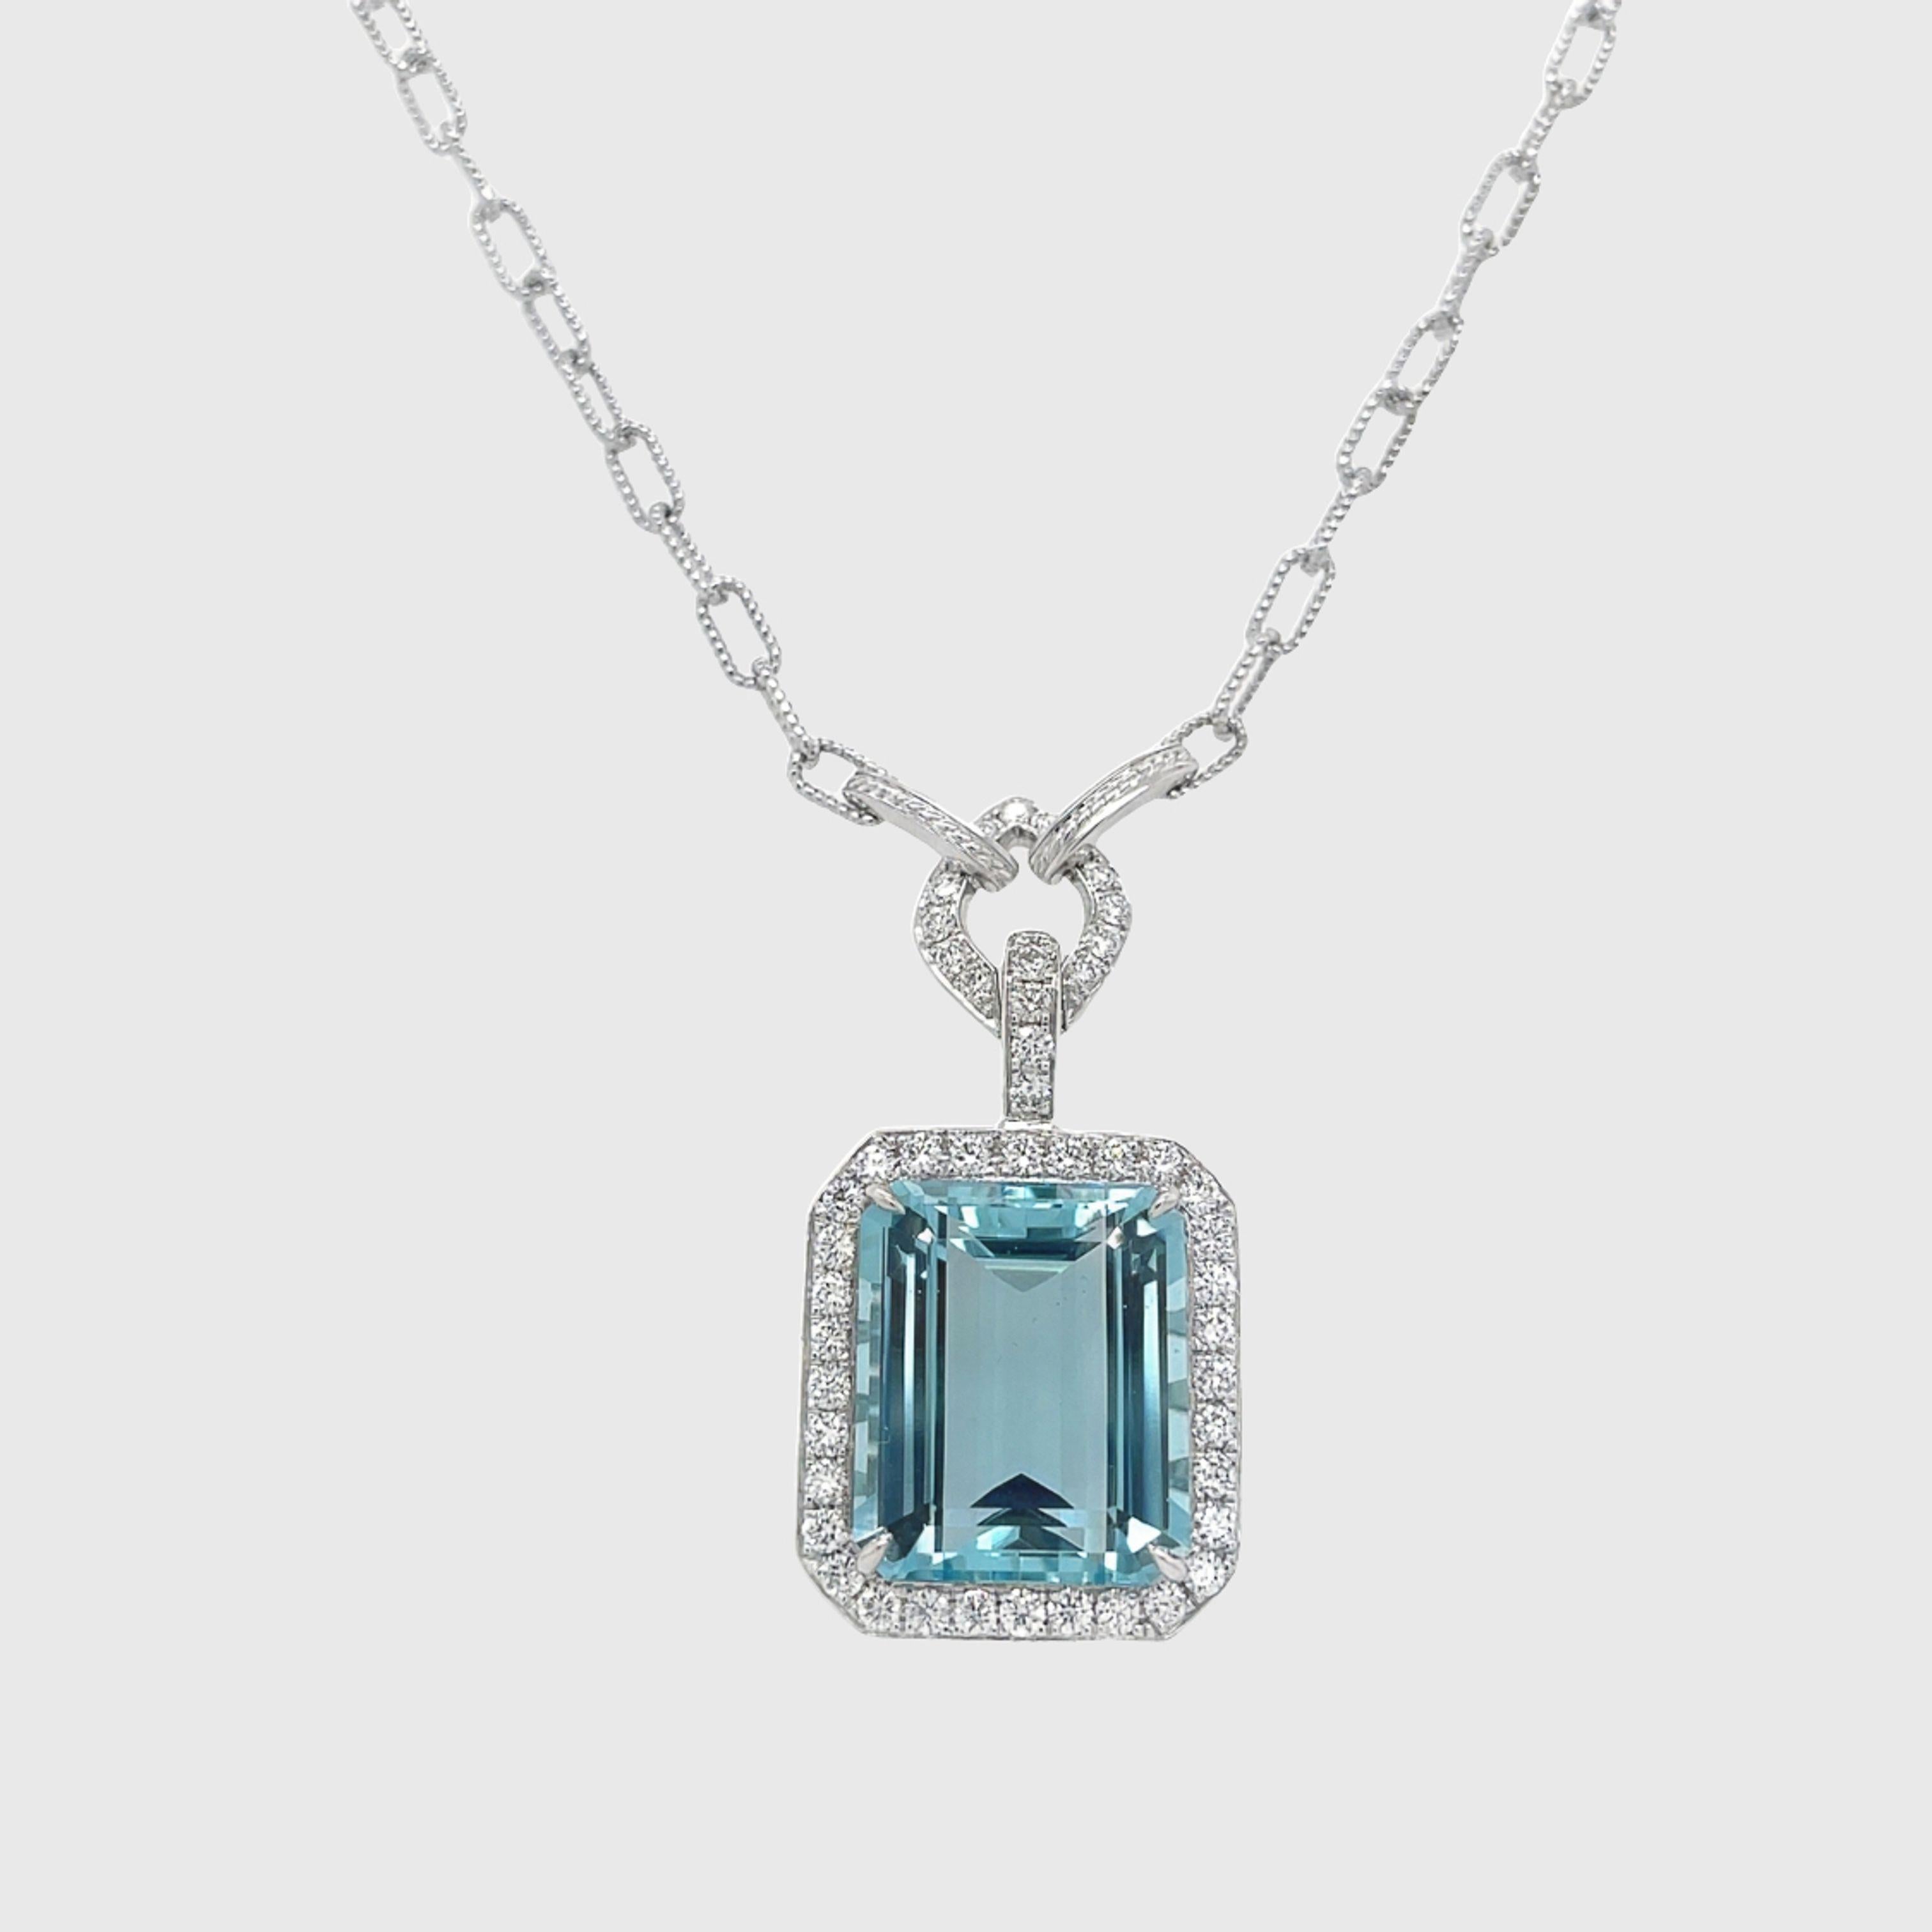 Necklace contains one center emerald cut aquamarine gemstone weighing 14.66cts. 
Center aqua is surrounded by a square halo of round brilliant diamonds weighing a total of 1.25cts. Aqua is GIA certified. Diamonds are F in color and VS2 in clarity,